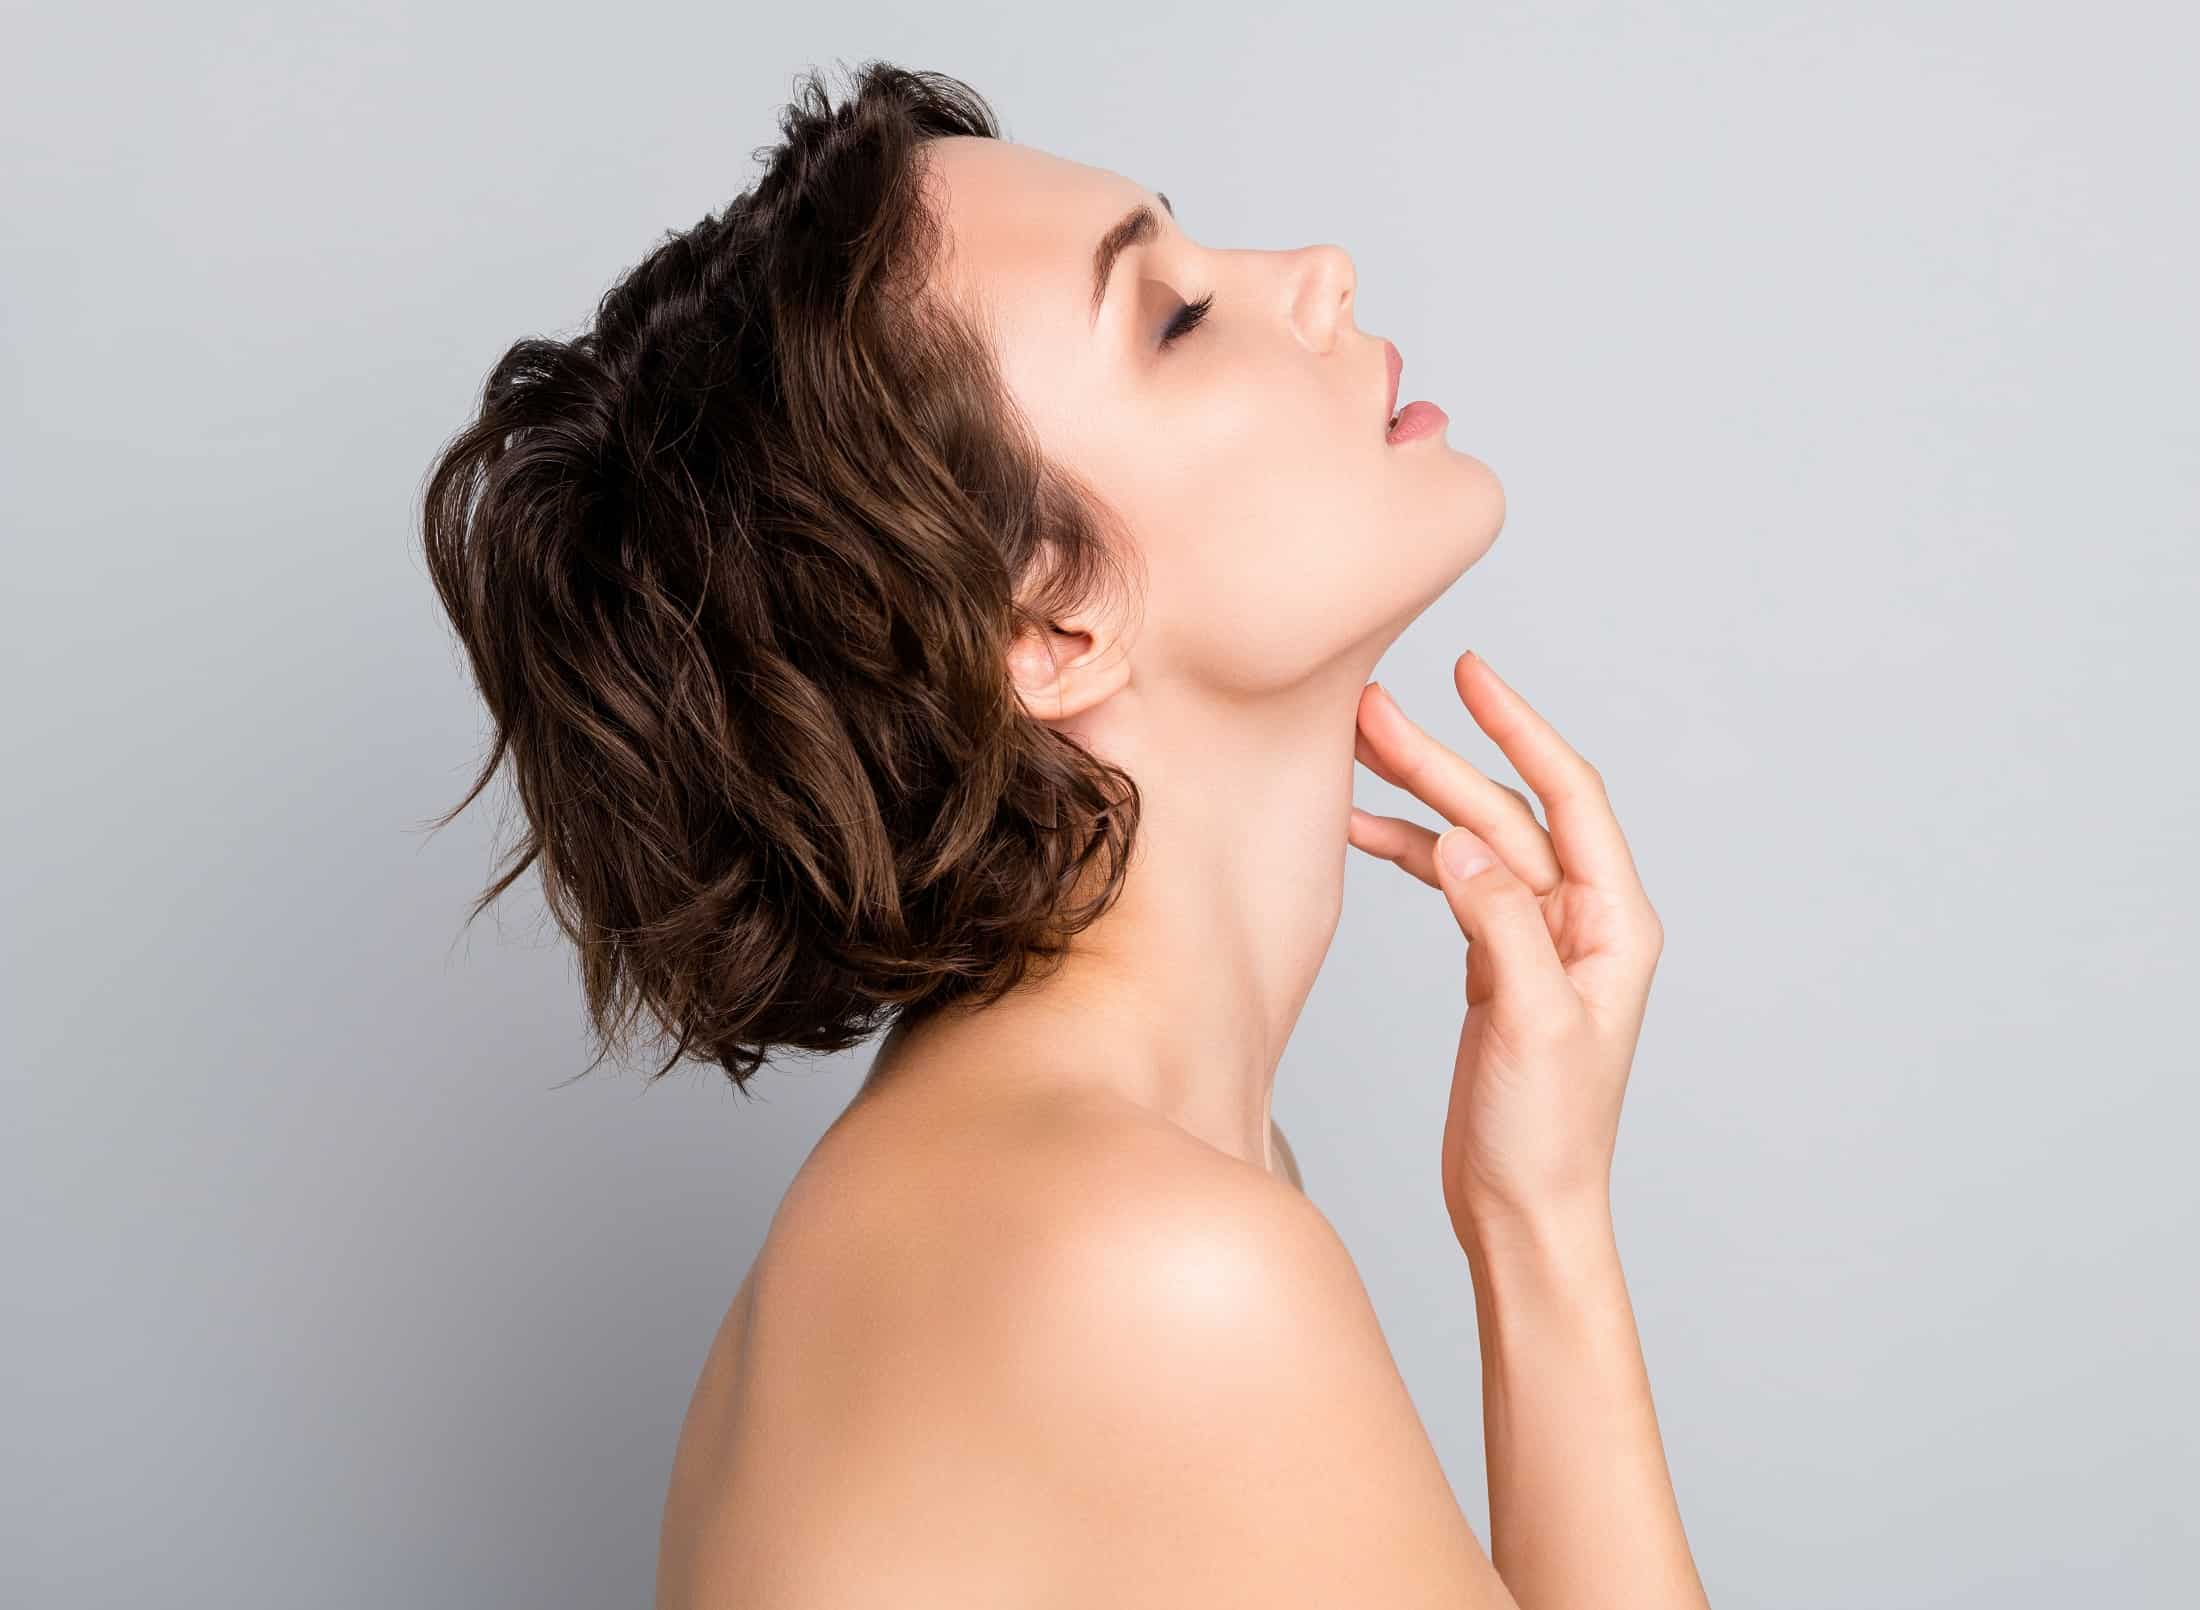 Neck betrays your age the fastest. Check out how to care for your skin in this area